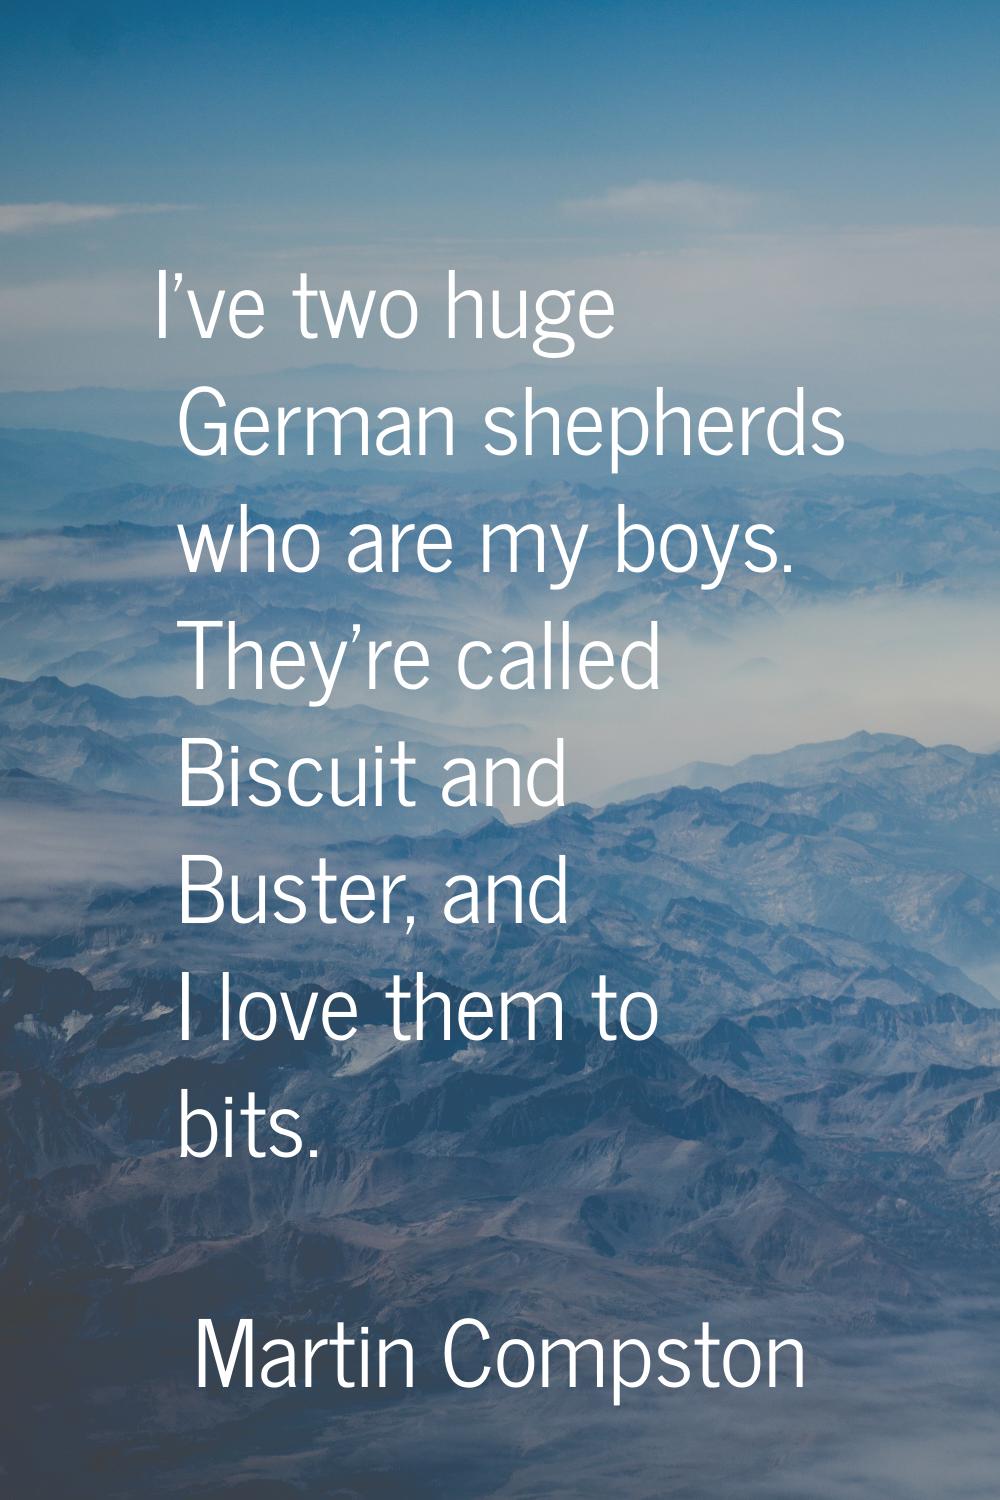 I've two huge German shepherds who are my boys. They're called Biscuit and Buster, and I love them 